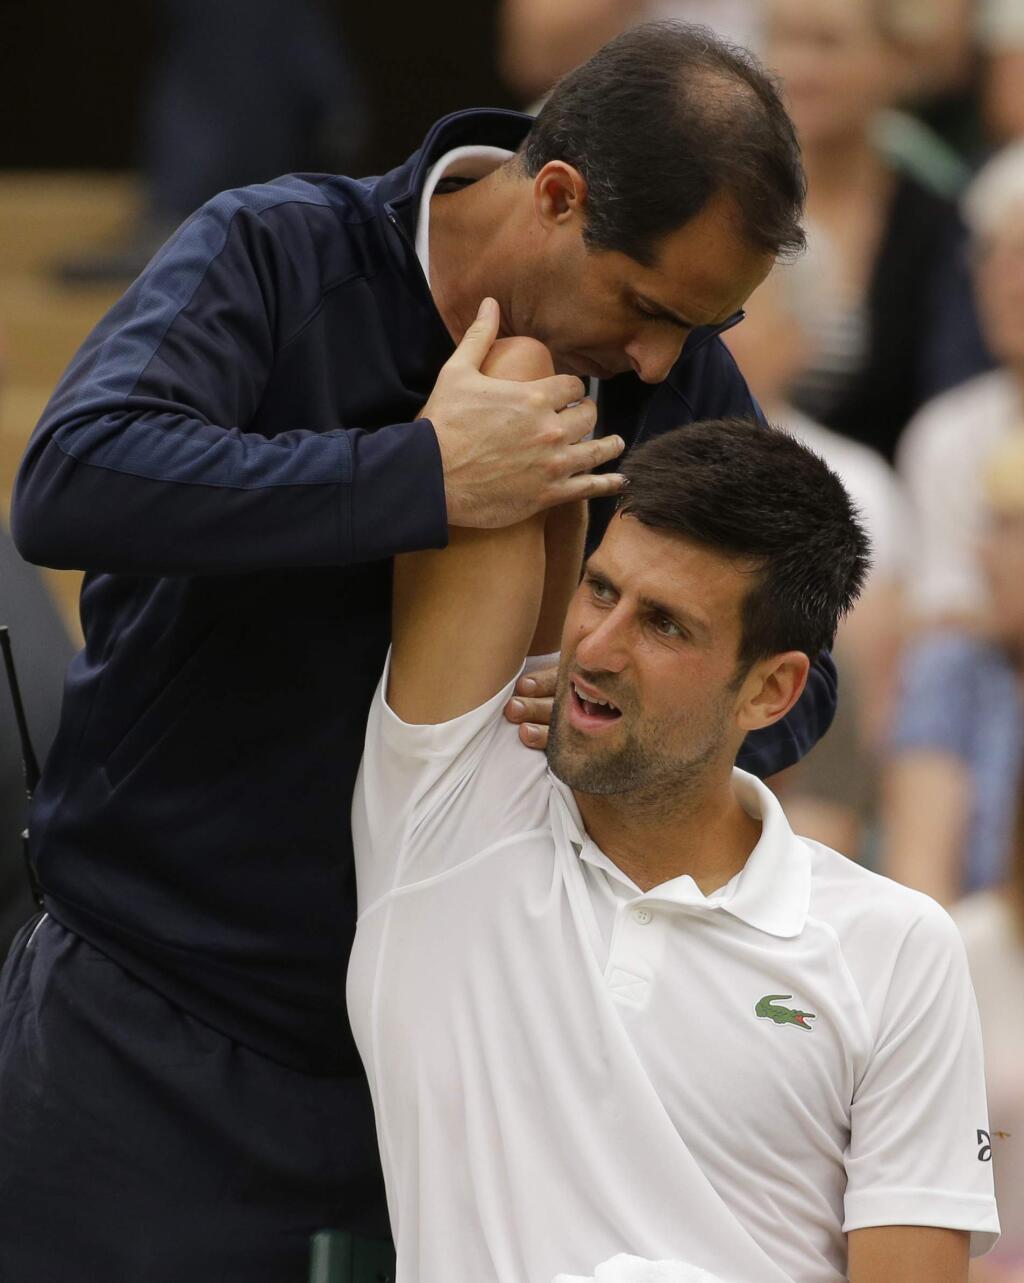 FILE - This is a Tuesday, July 11, 2017 file photo of Serbia's Novak Djokovic as he receives treatment from a trainer during a break in his Men's Singles Match against Adrian Mannarino of France on day eight at the Wimbledon Tennis Championships in London. Novak Djokovic will miss the rest of this season because of an injured right elbow. The 12-time major champion will skip the U.S. Open. That ends his streak of playing in 51 consecutive Grand Slam tournaments. (AP Photo/Alastair Grant/File)